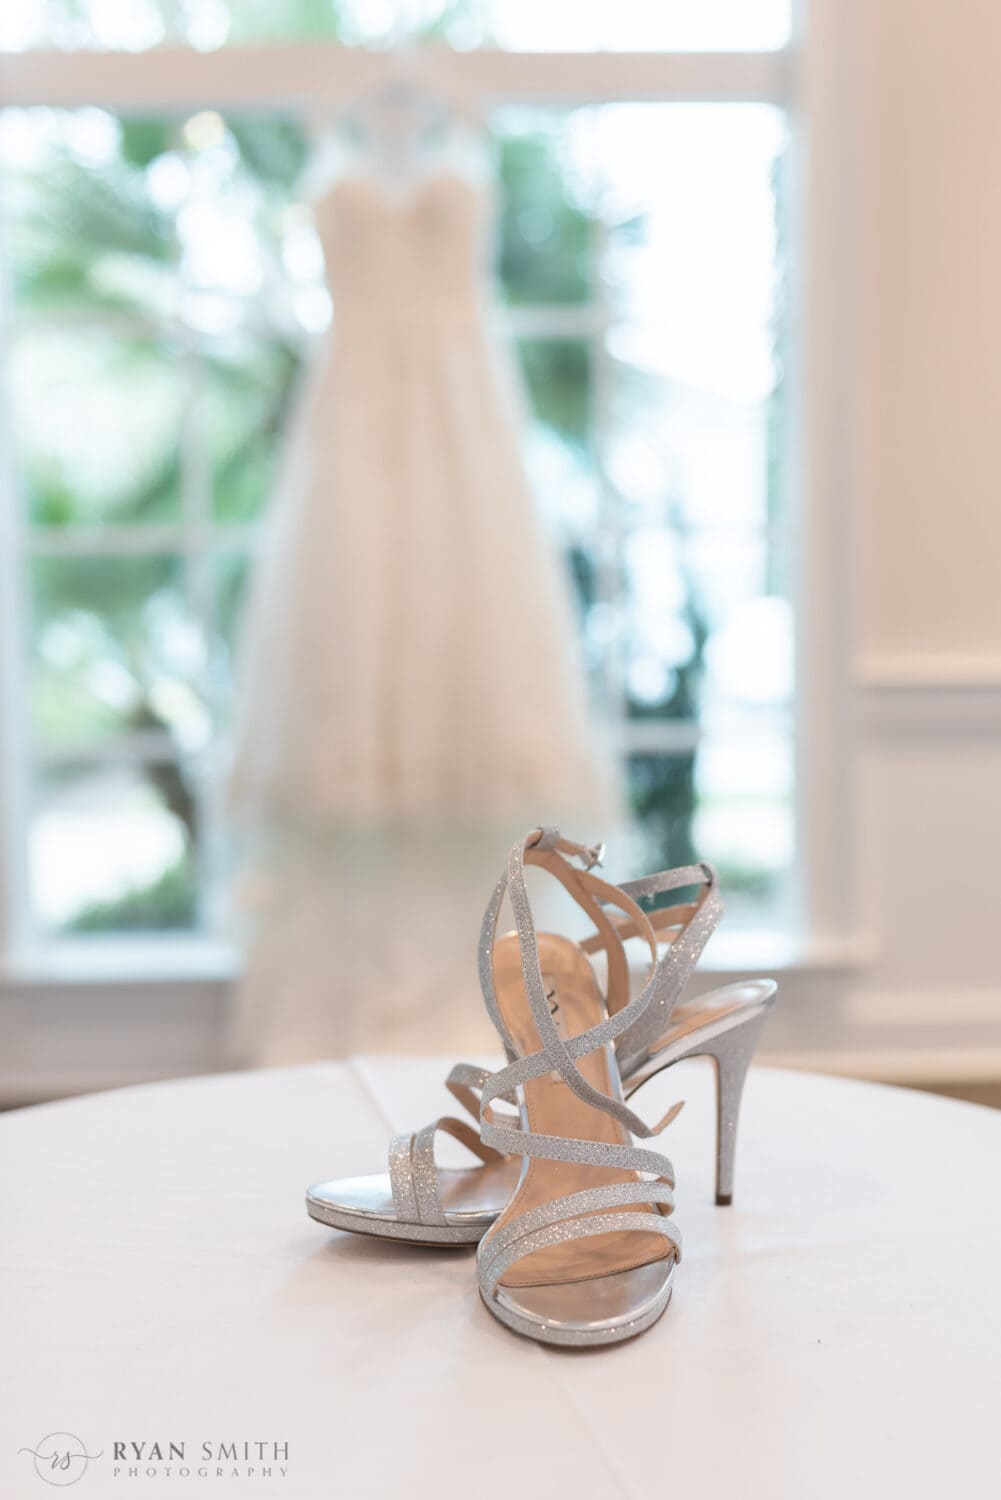 Bride's shoes in focus with dress hanging in the background - 21 Main Events at North Beach